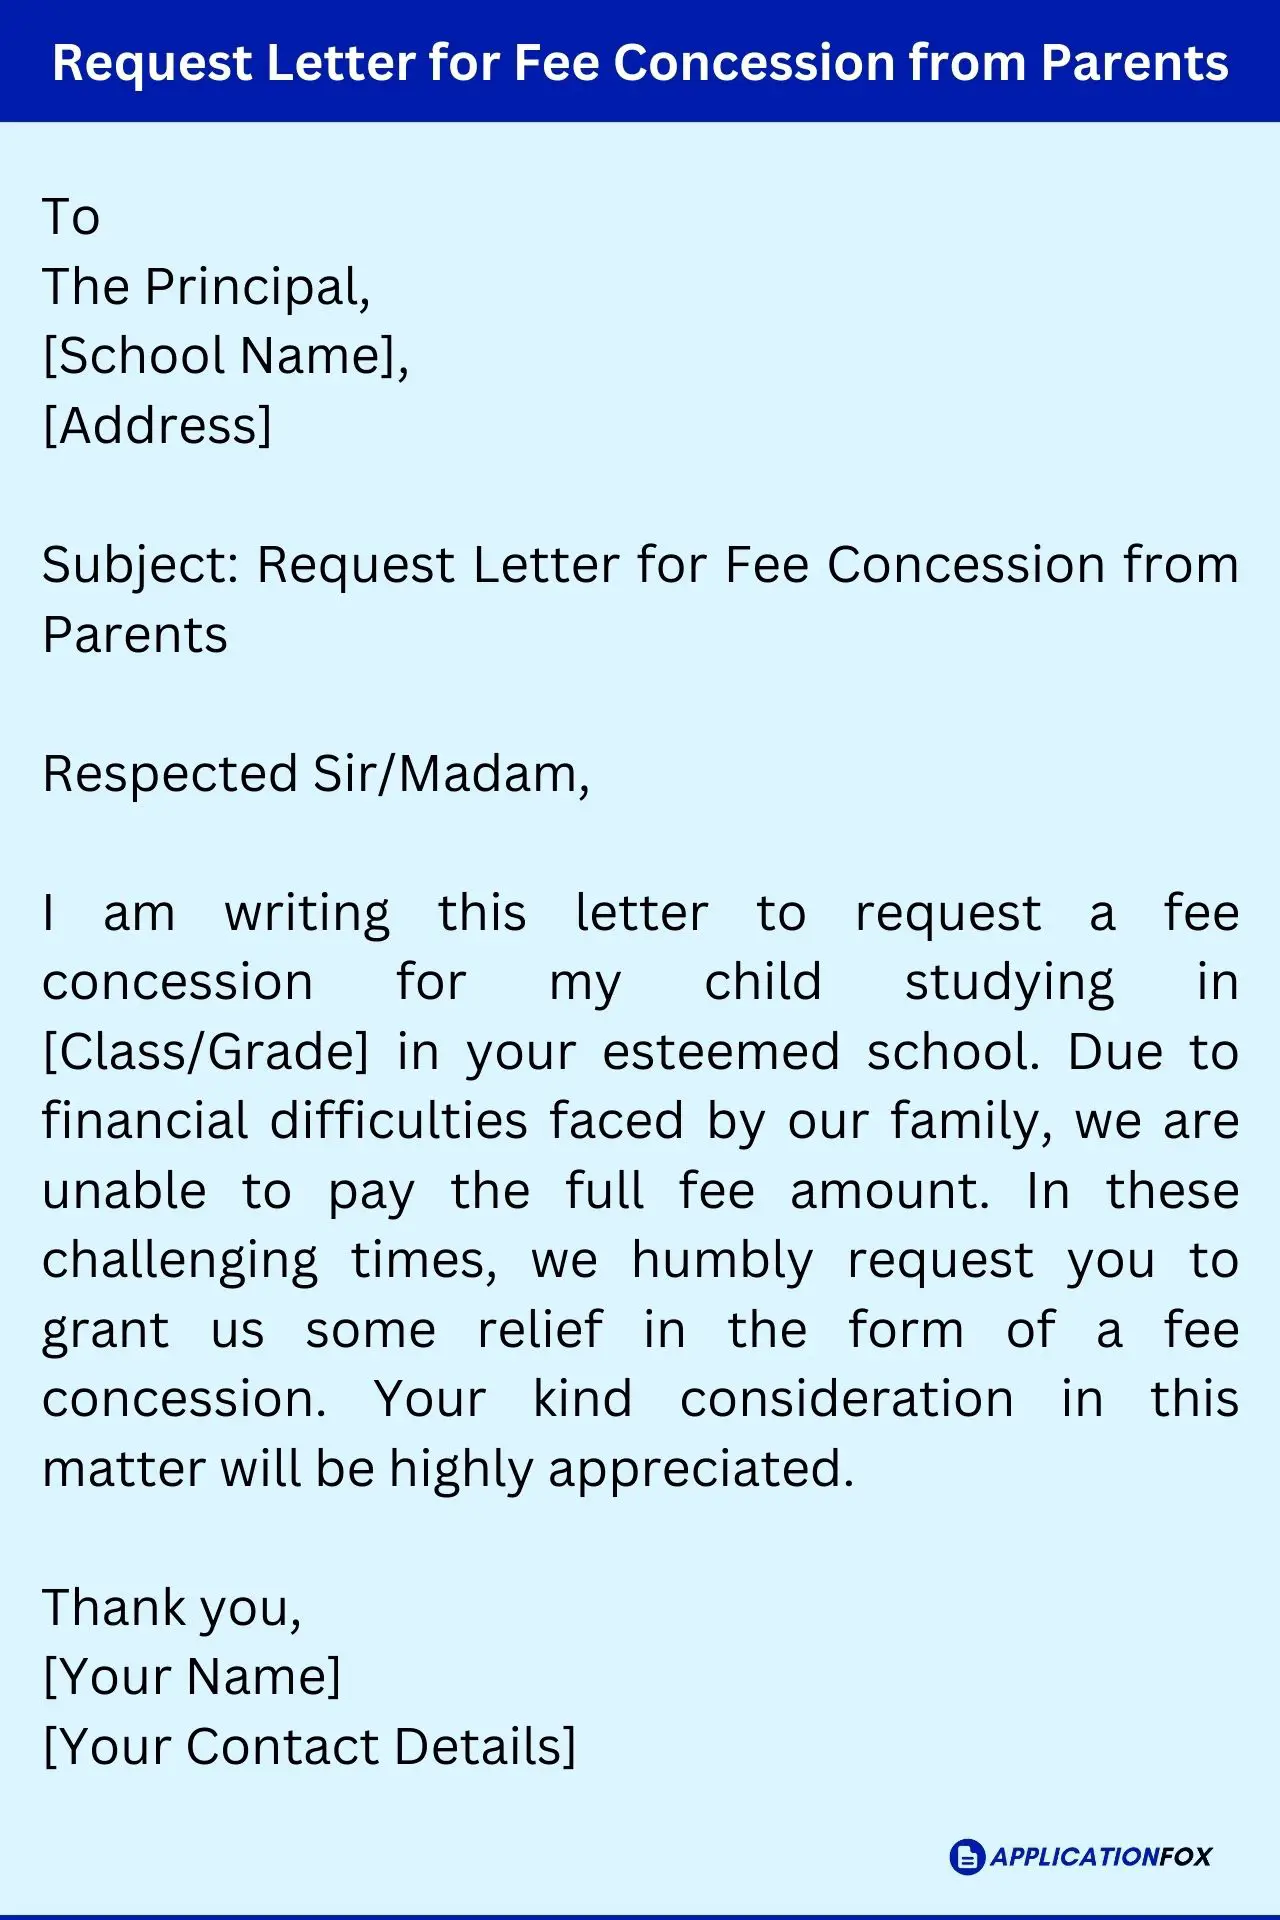 Request Letter for Fee Concession from Parents